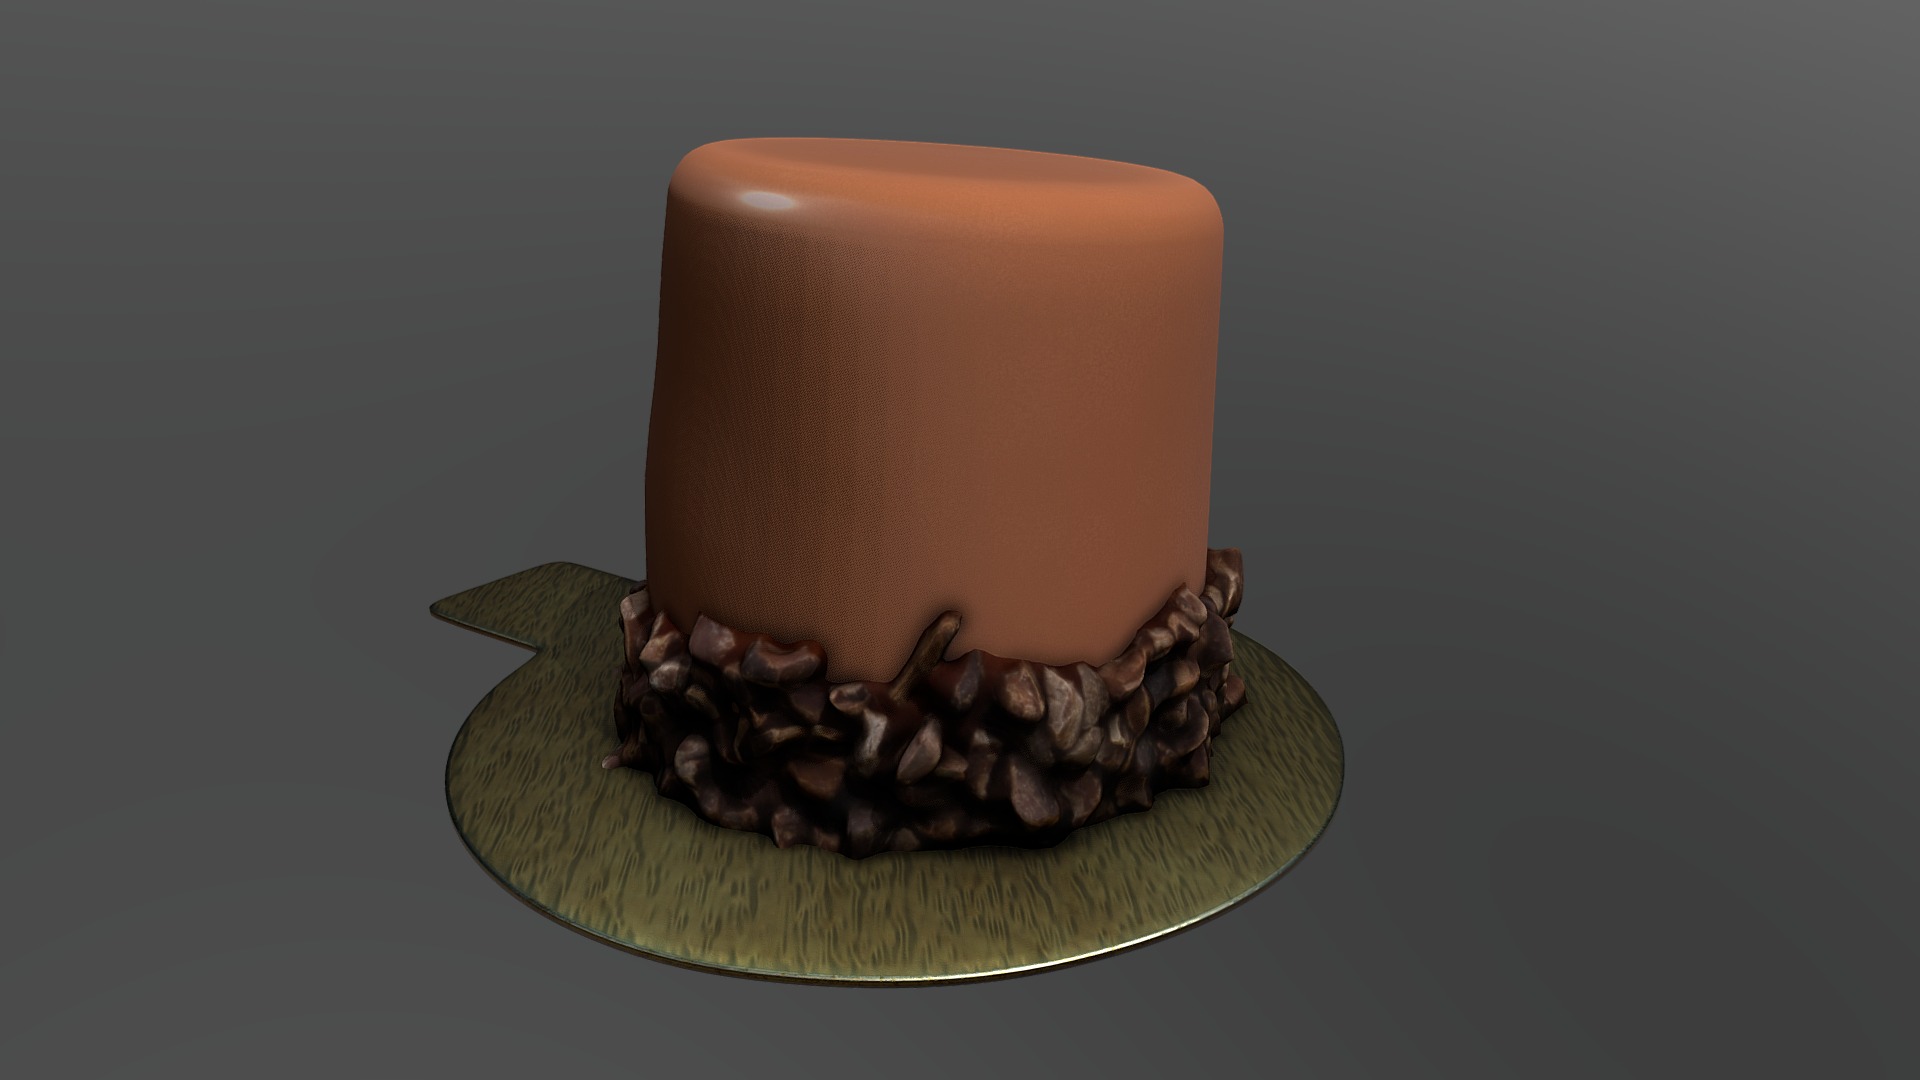 3D model 5PIG - This is a 3D model of the 5PIG. The 3D model is about a cake with chocolate frosting.